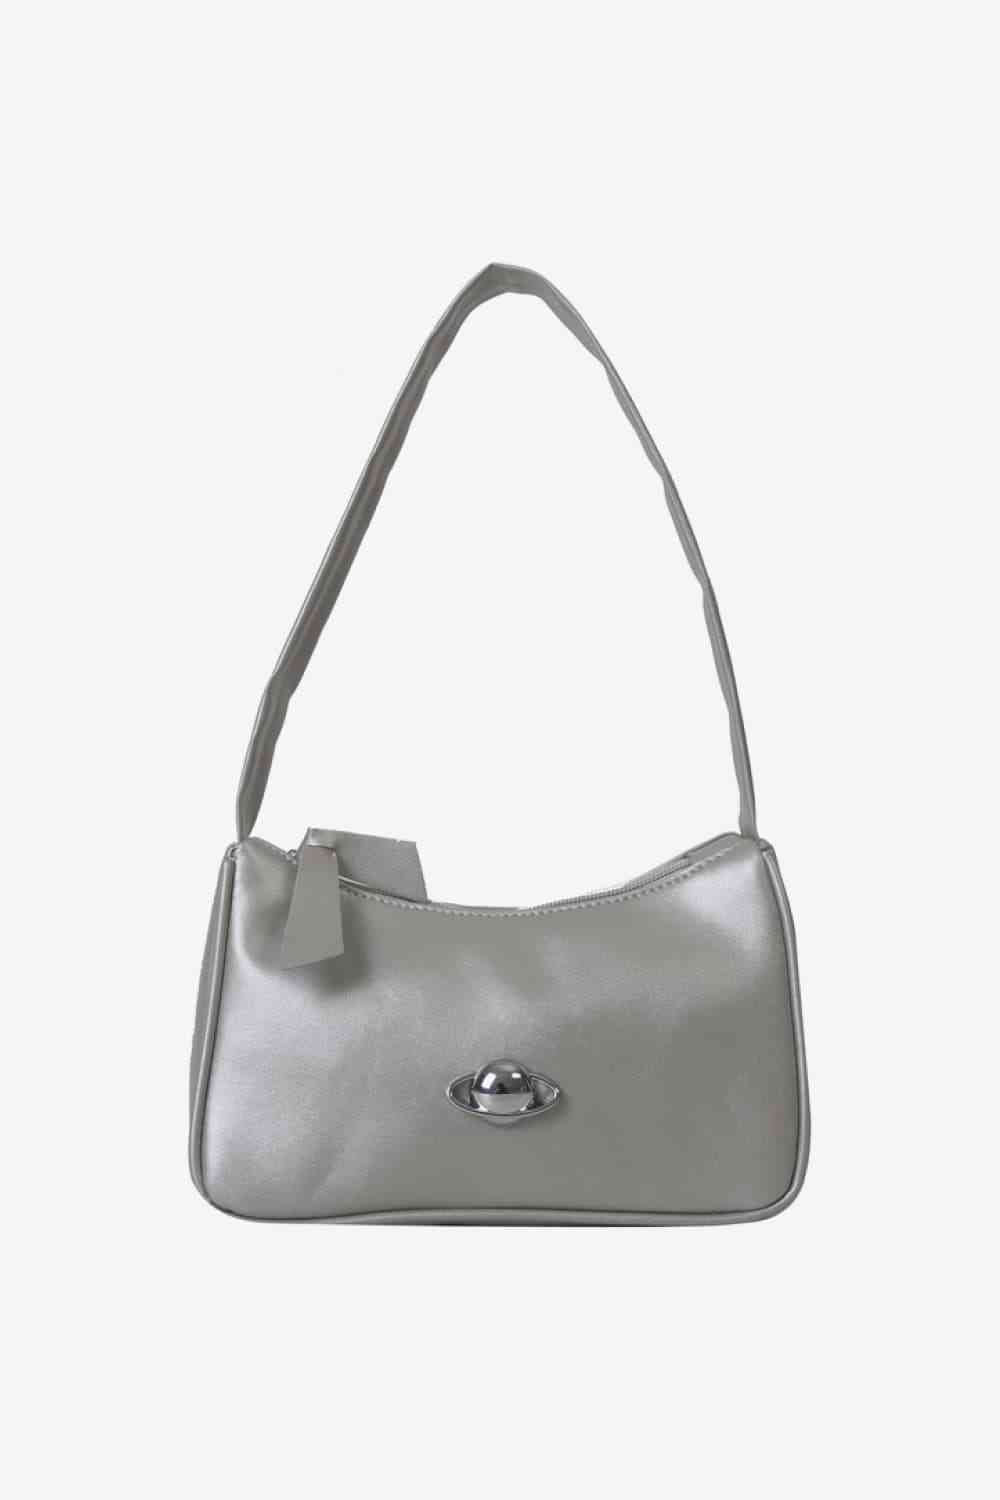 PU Leather Shoulder Bag - Silver / One Size - All Products - Handbags - 5 - 2024